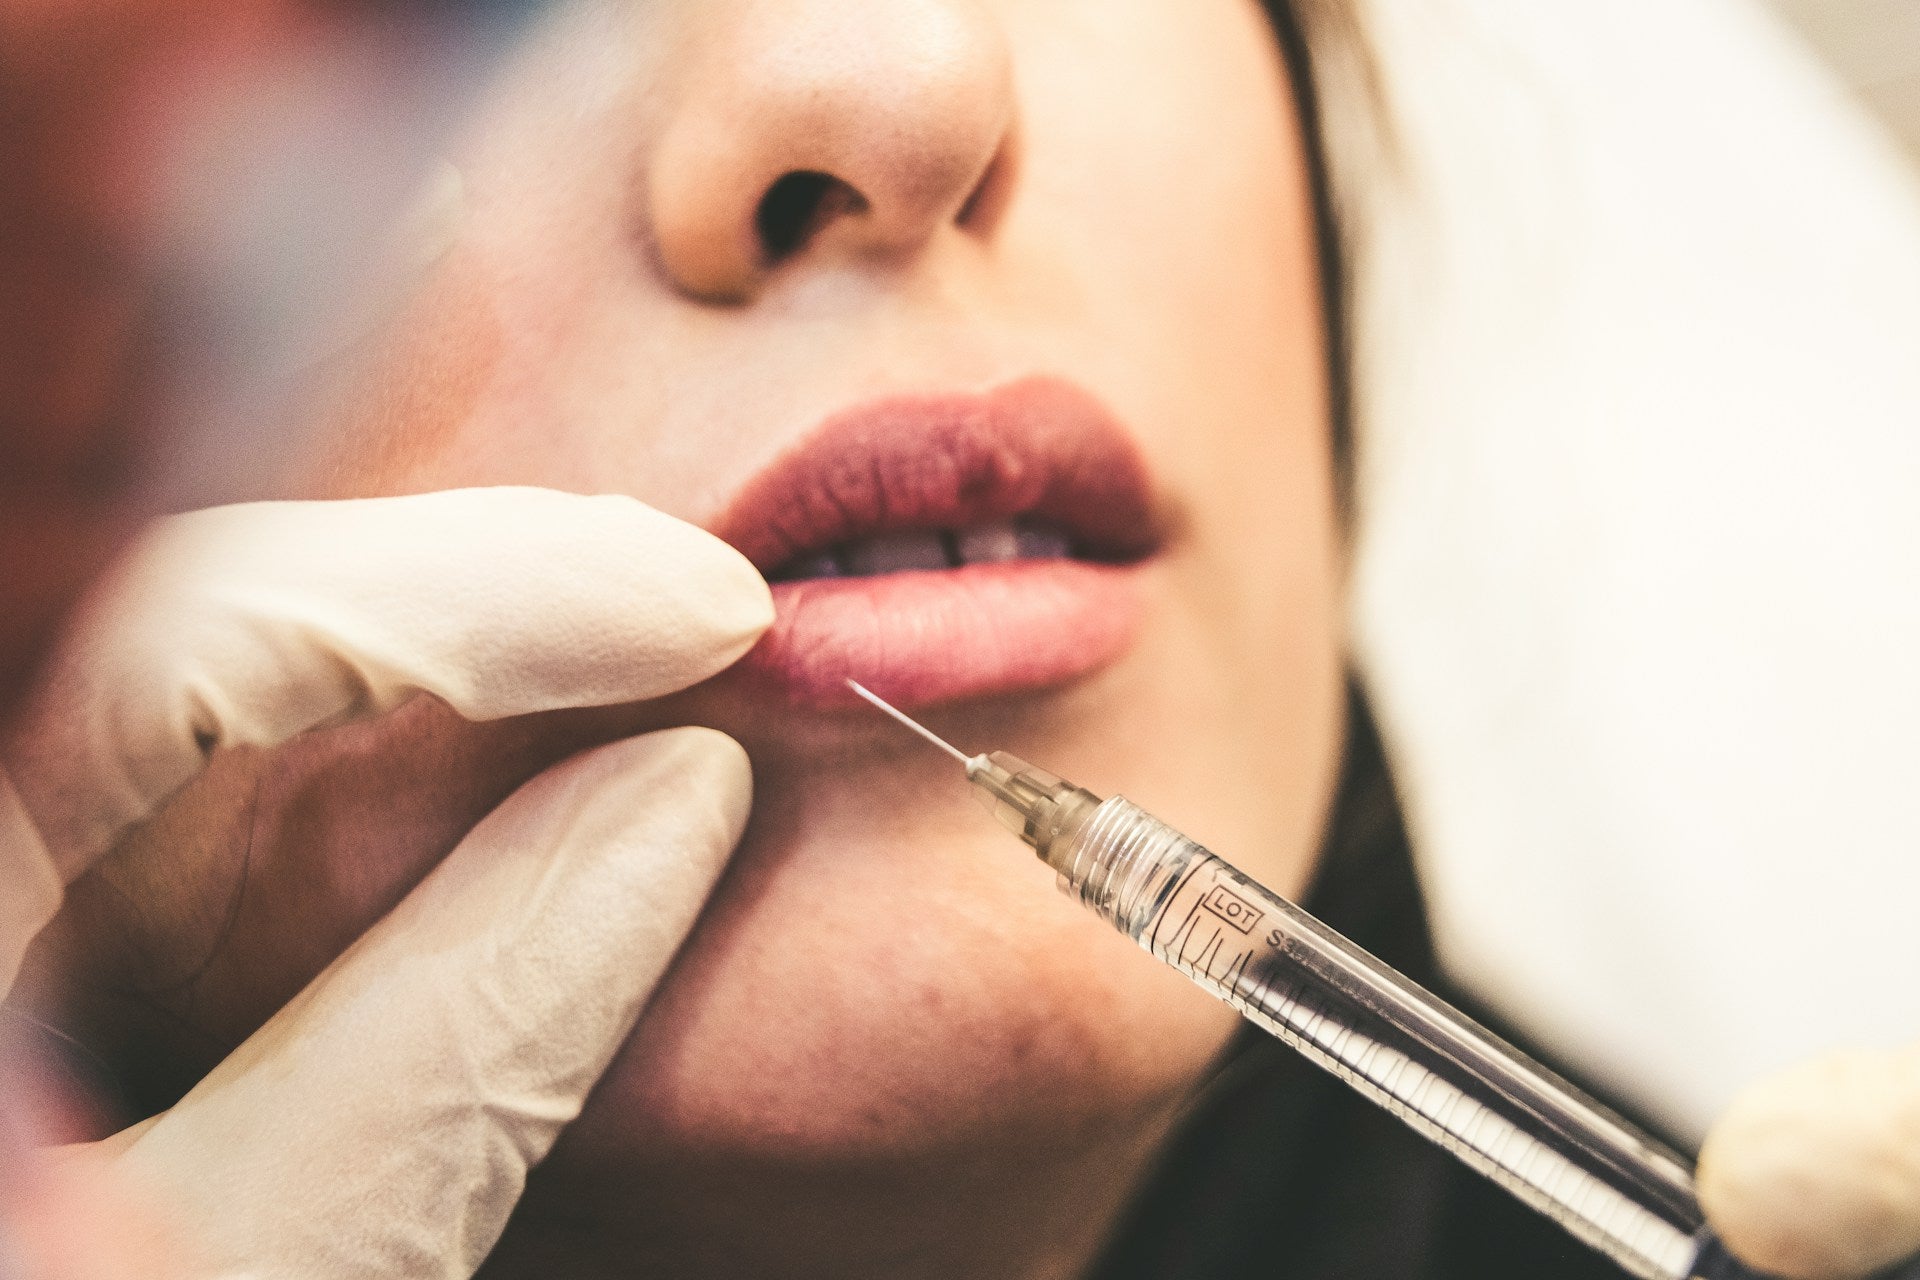 Red Light Therapy vs Botox: What's the Difference?